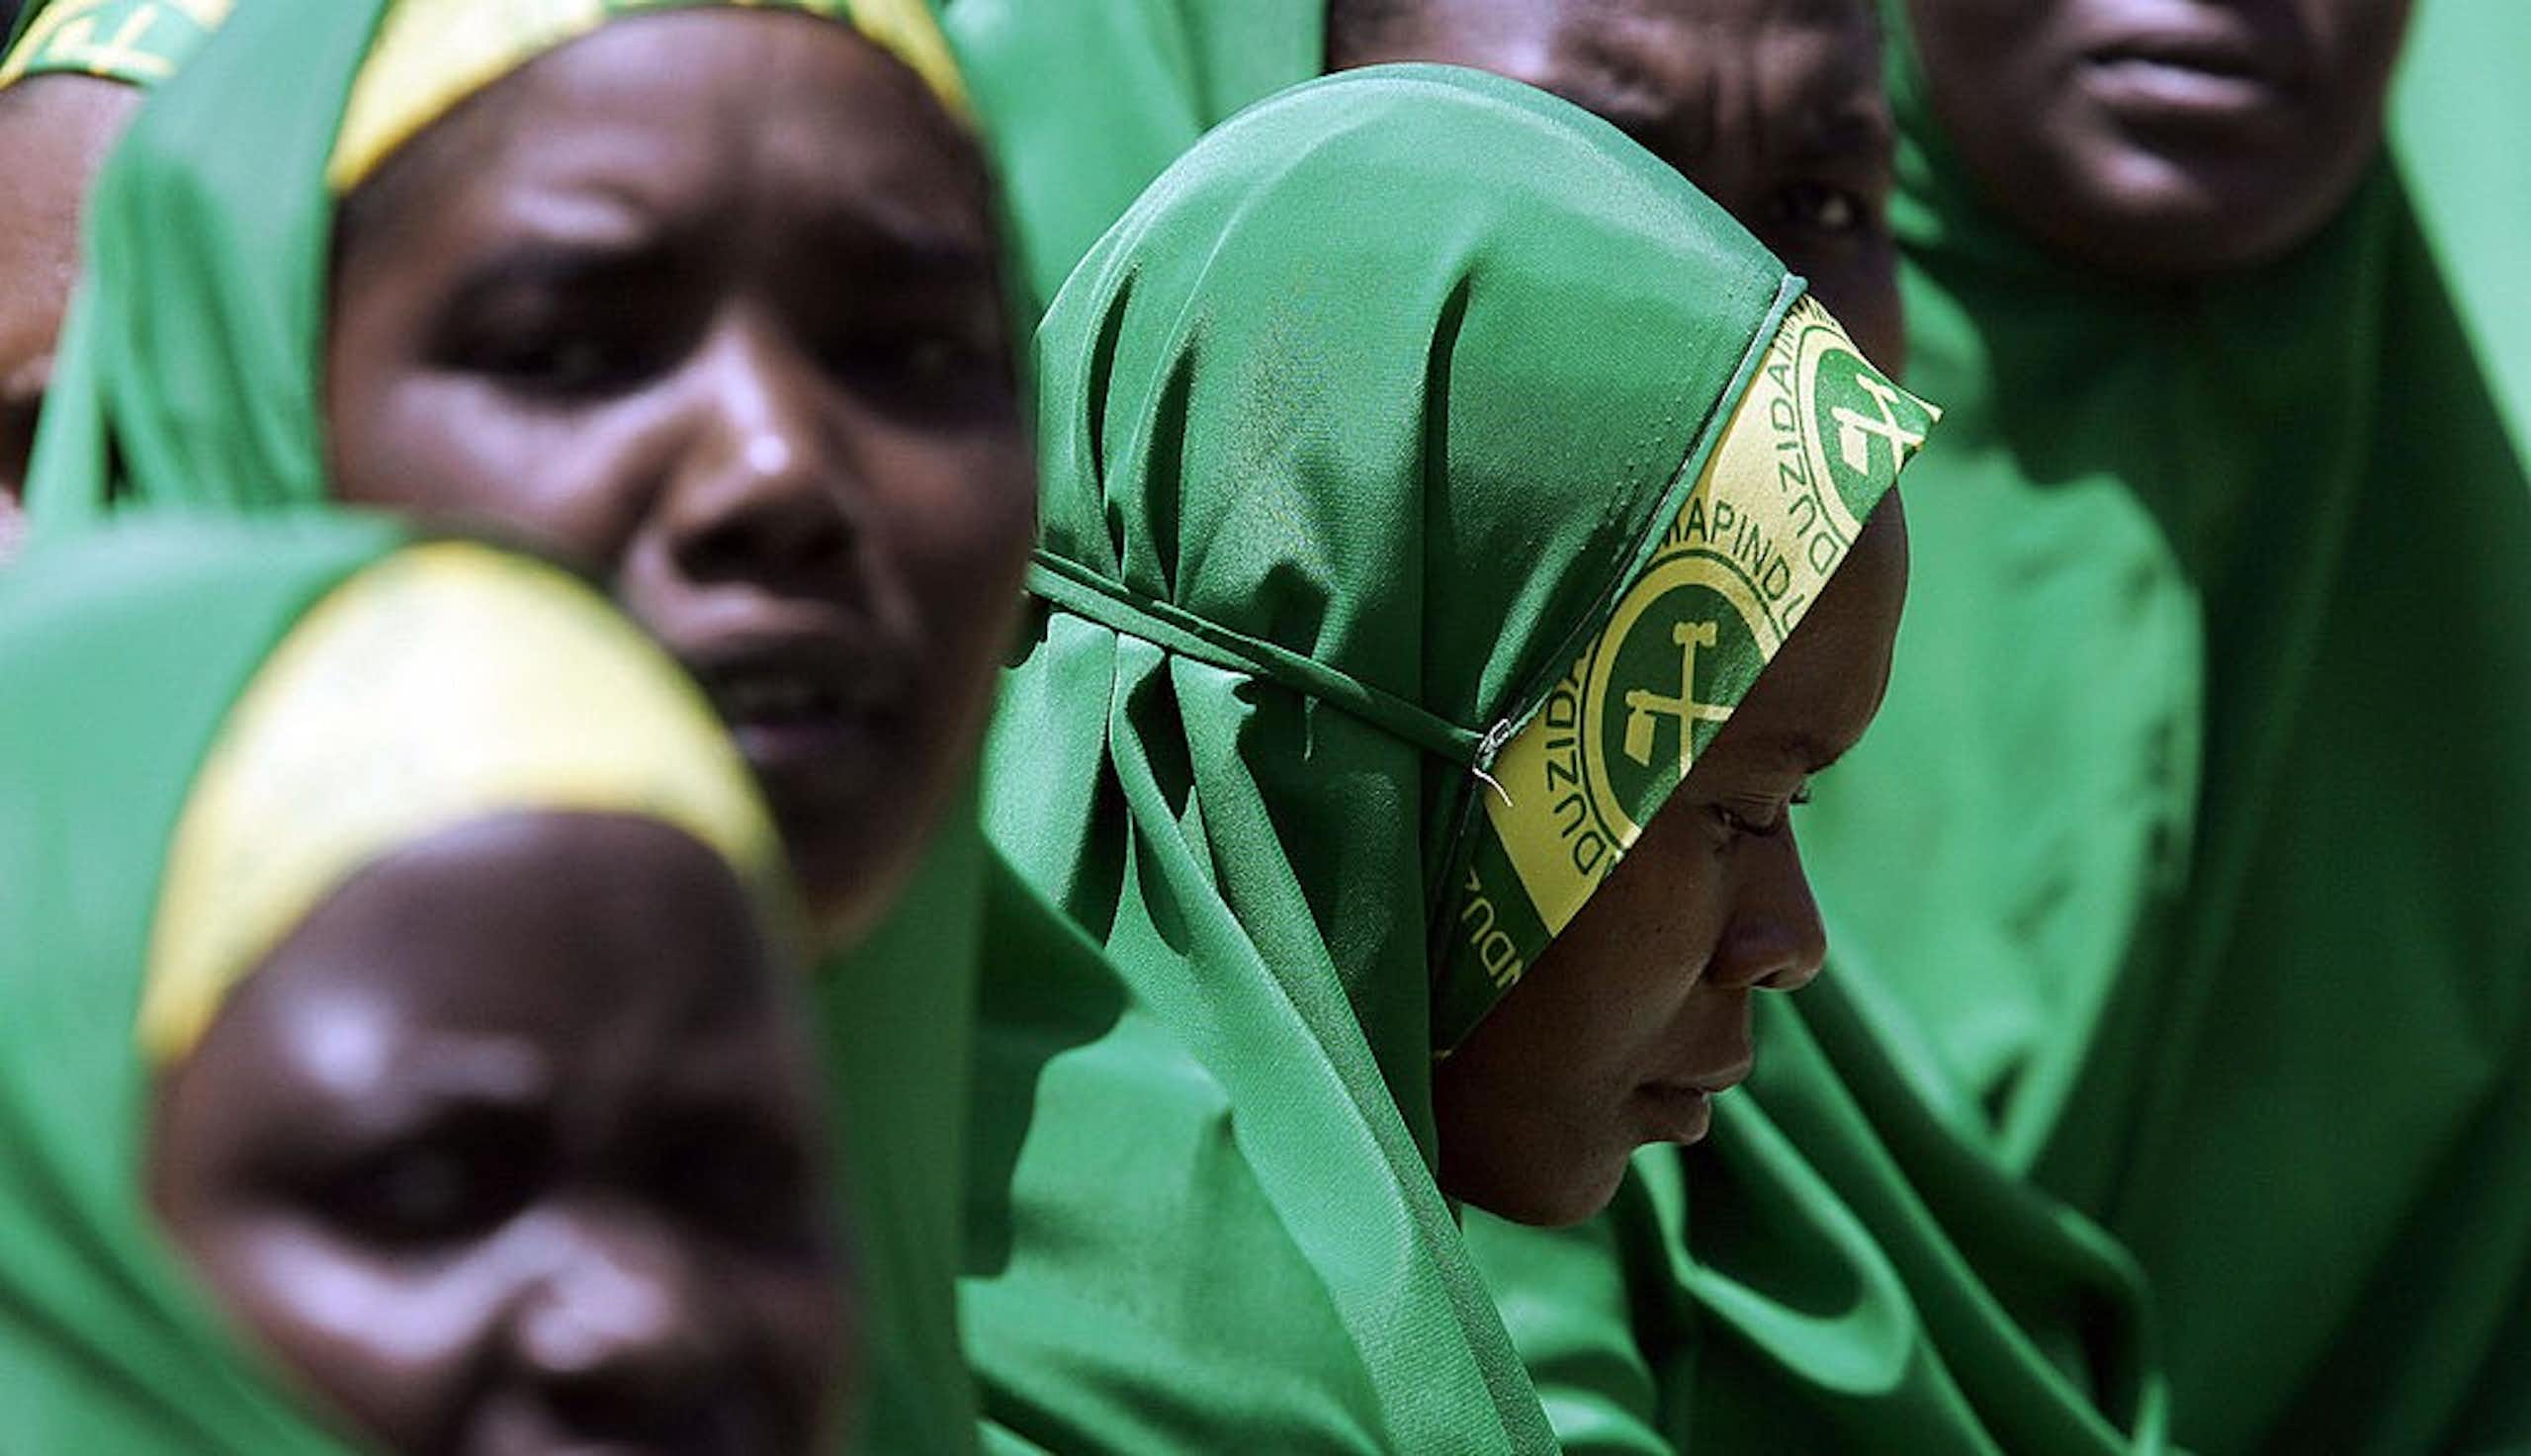 A close-up of women veiled in green and yellow